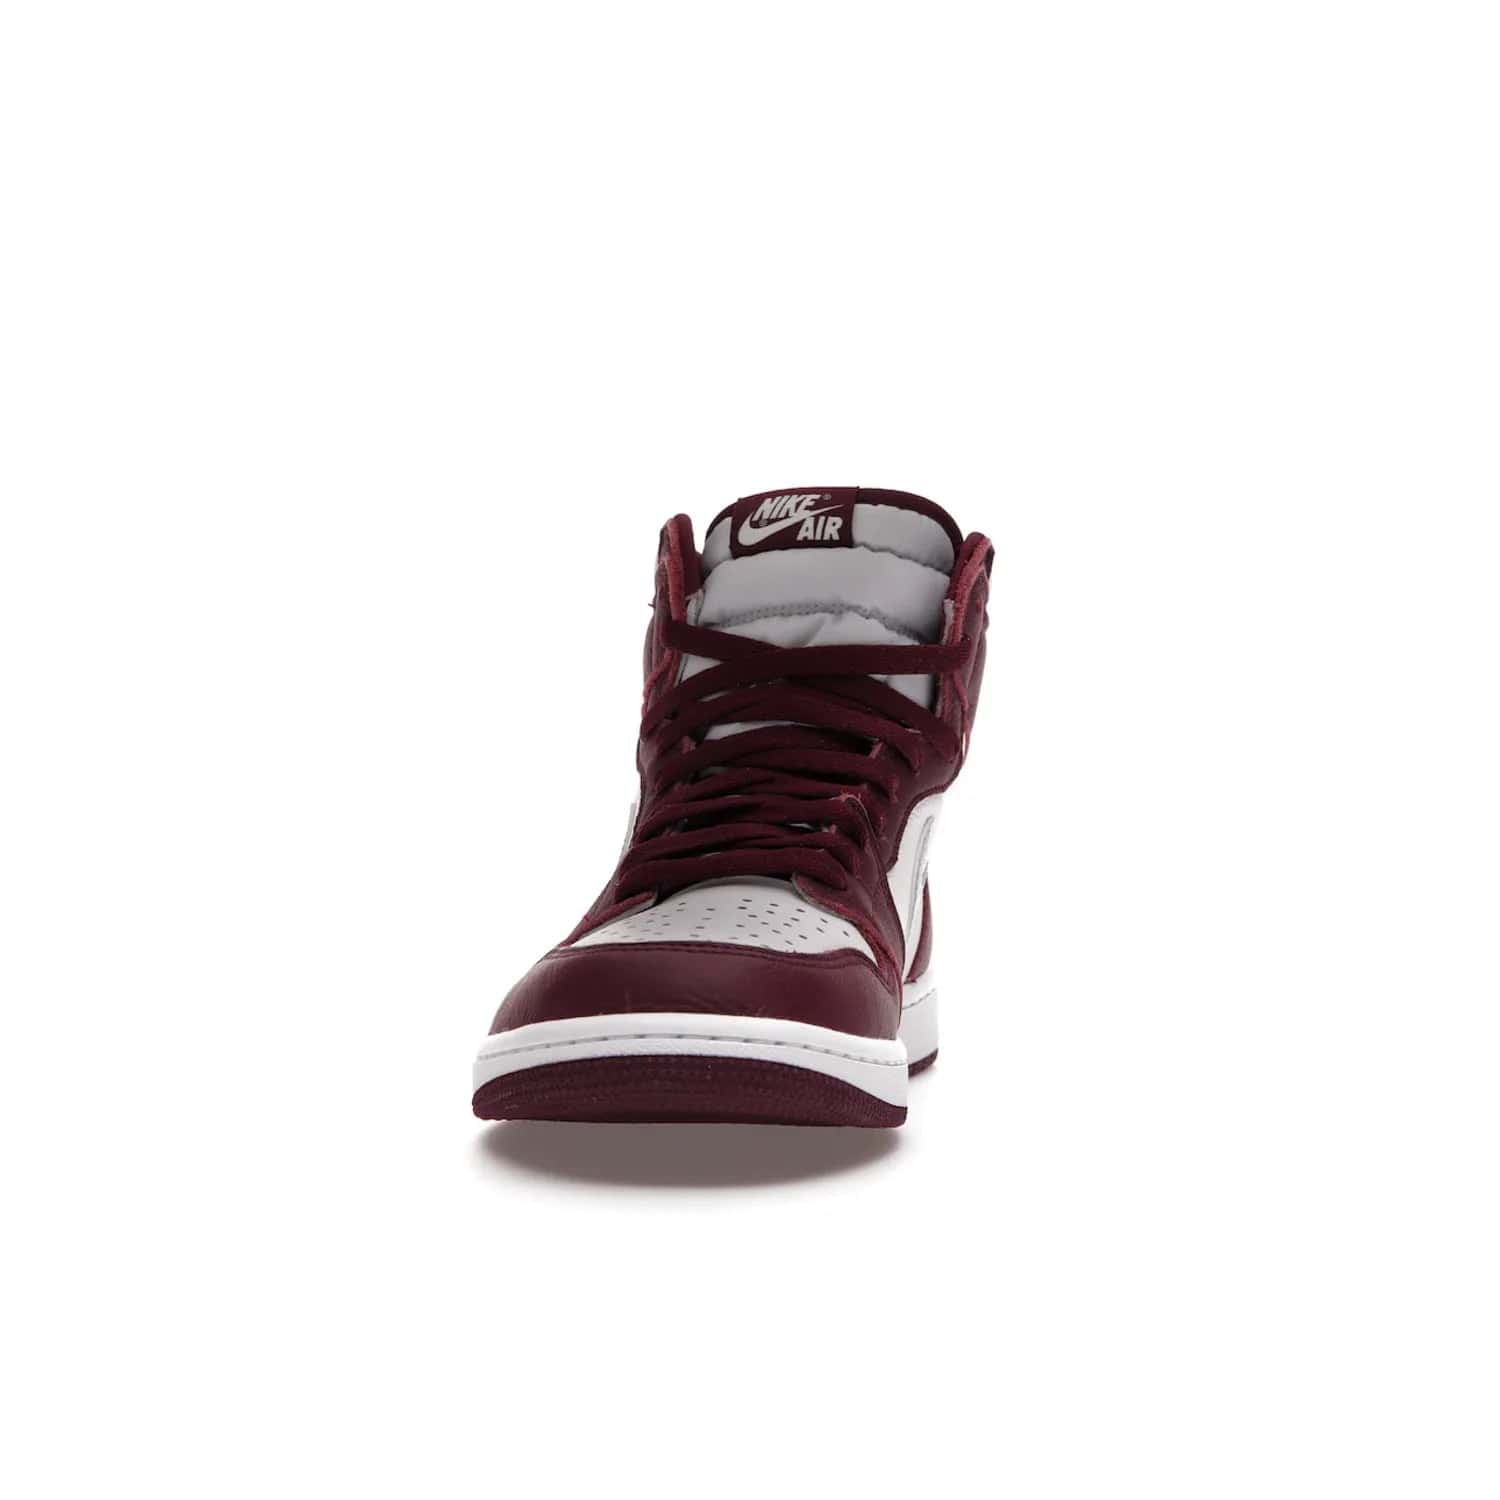 Jordan 1 Retro High OG Bordeaux - Image 11 - Only at www.BallersClubKickz.com - Shop the classic Air Jordan 1 High Bordeaux with a modern high-top cut. The timeless Bordeaux and White-Metallic Silver colorway, releasing Nov 20, 2021, is perfect for practice or a night out.